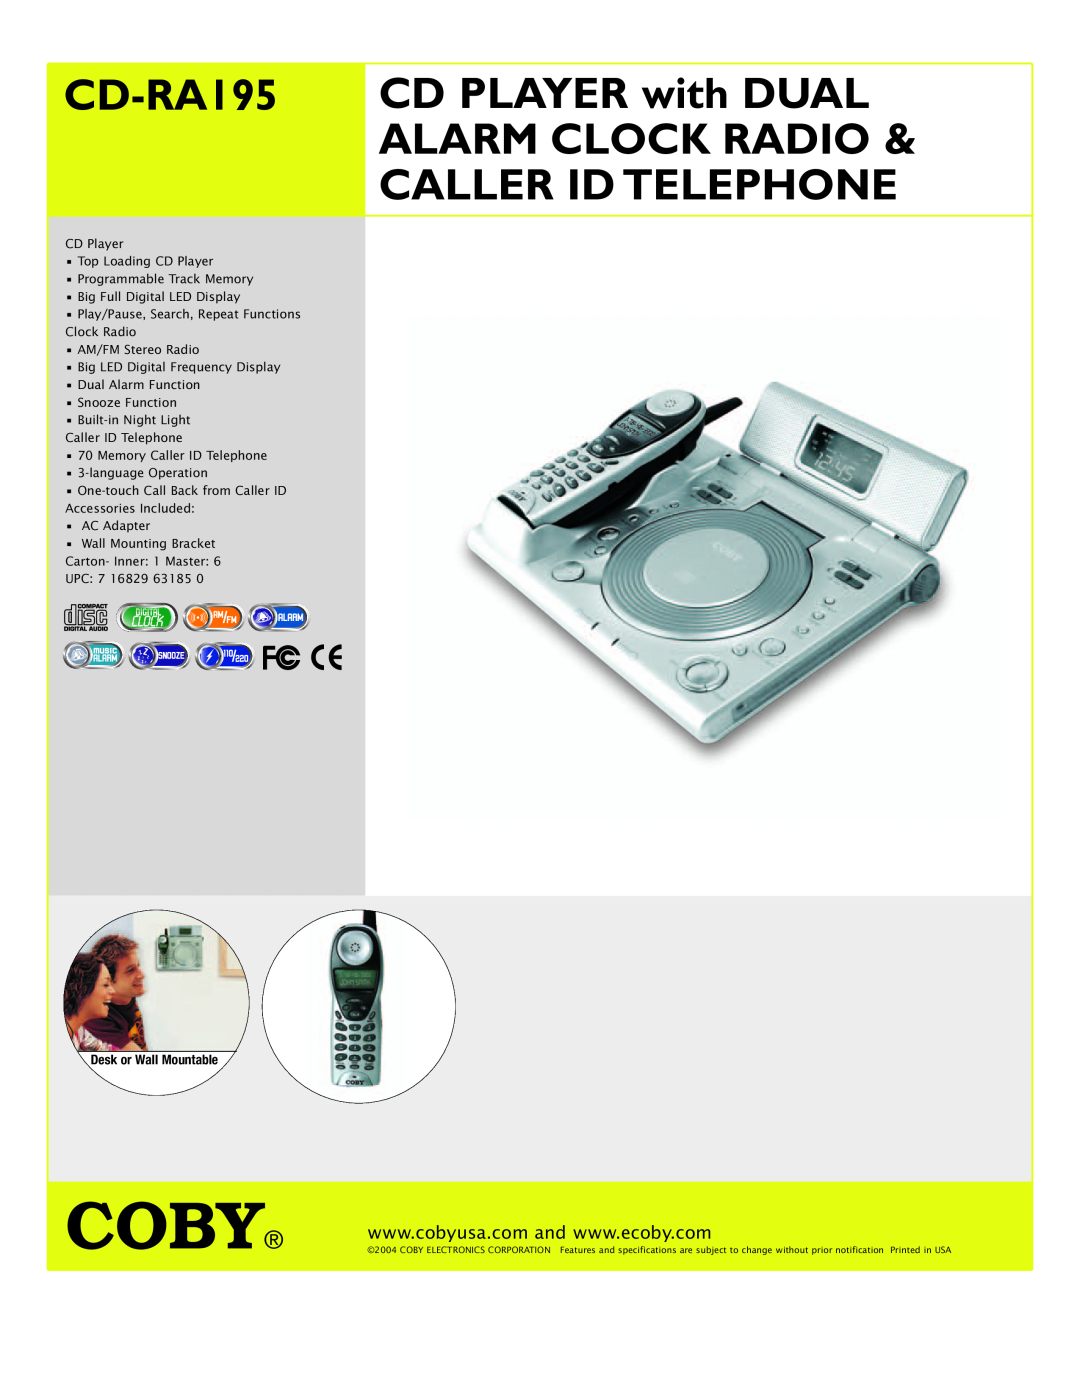 COBY electronic CD-RA195 specifications Coby, CD PLAYER with DUAL, Alarm Clock Radio, Caller Id Telephone 